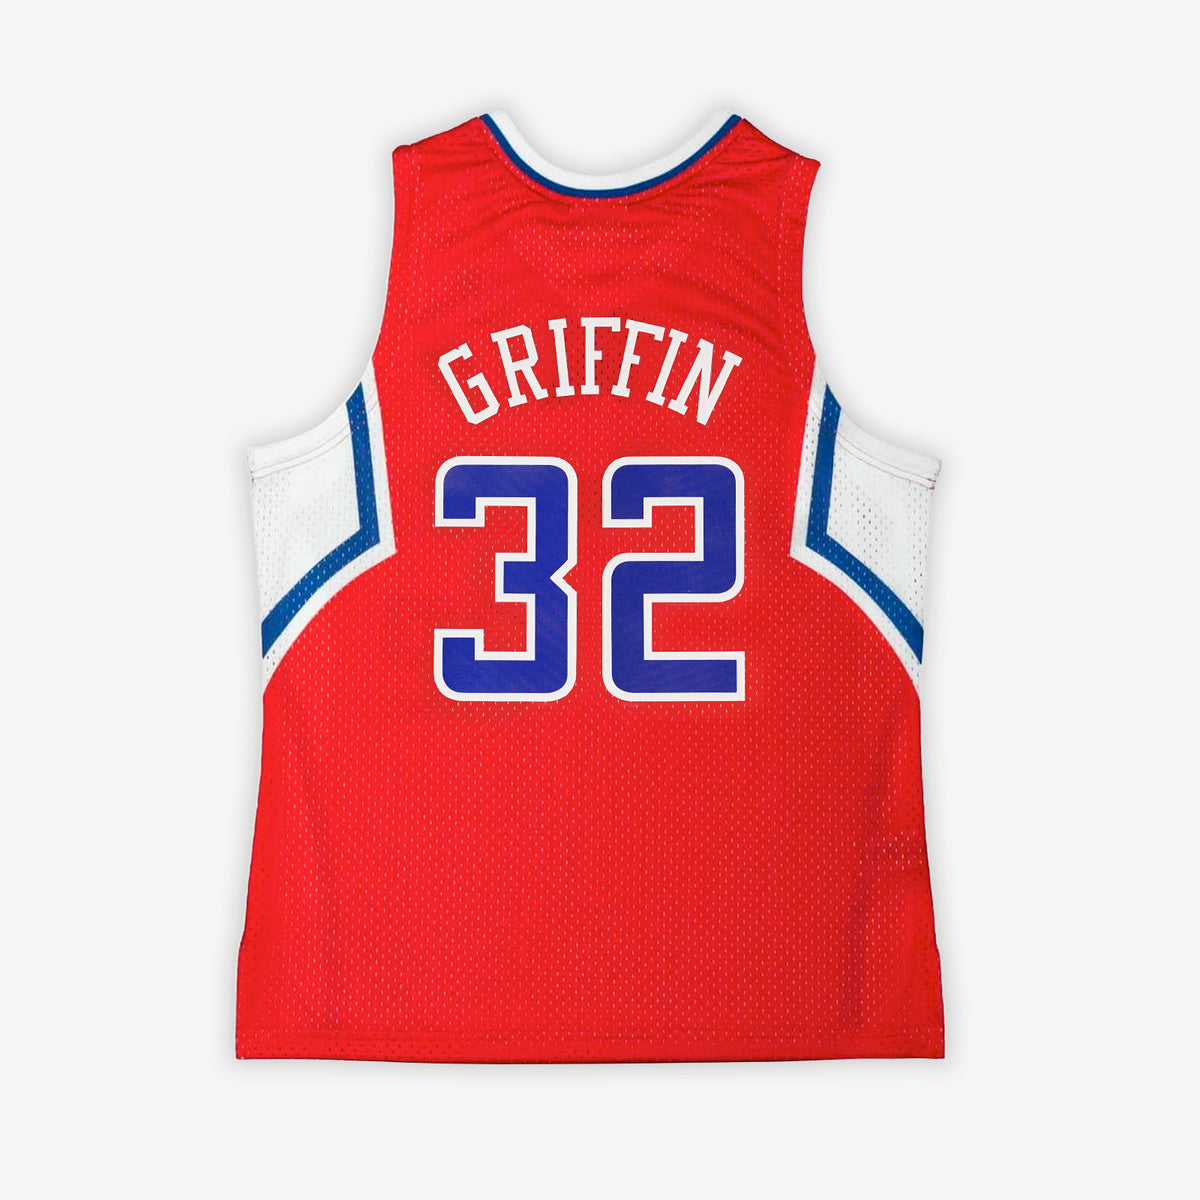 Blake Griffin Los Angeles Clippers 10-11 HWC Swingman Jersey - Red